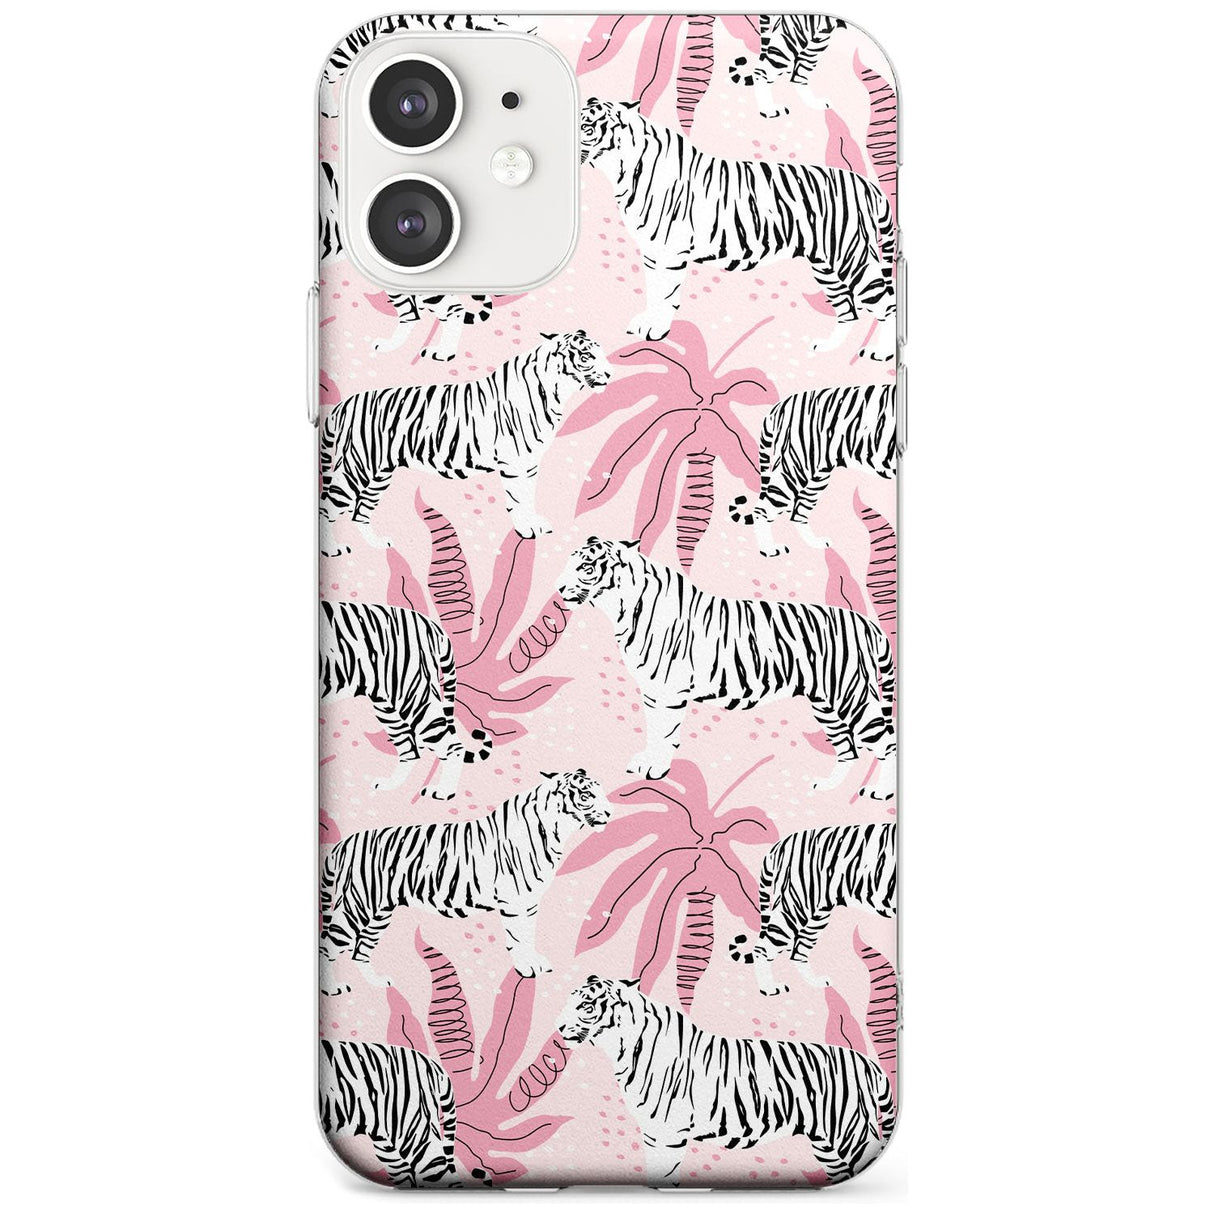 White Tigers on Pink Pattern Slim TPU Phone Case for iPhone 11